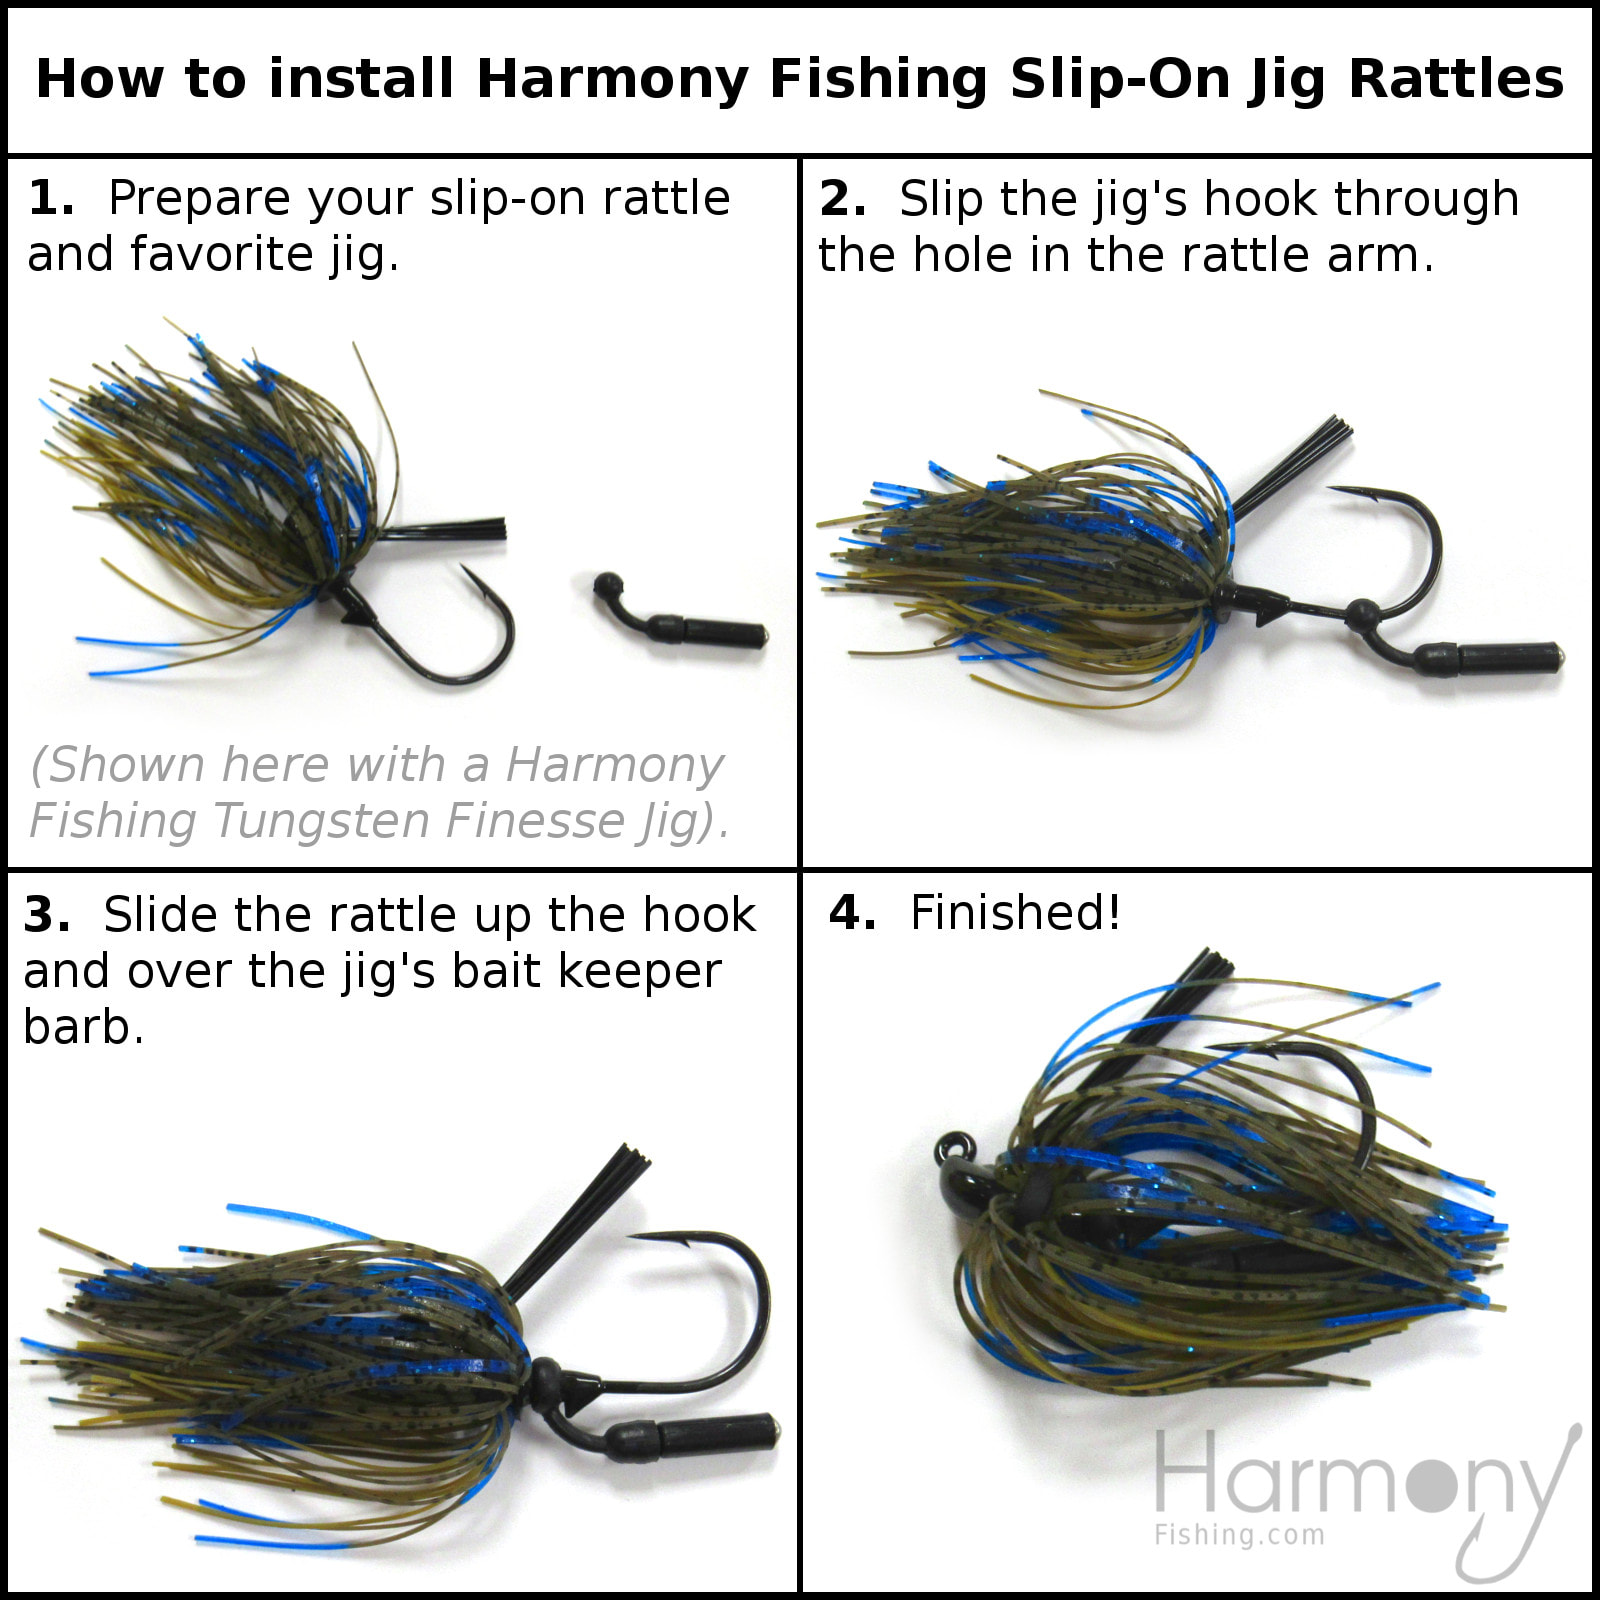  Harmony Fishing Stealth Clips